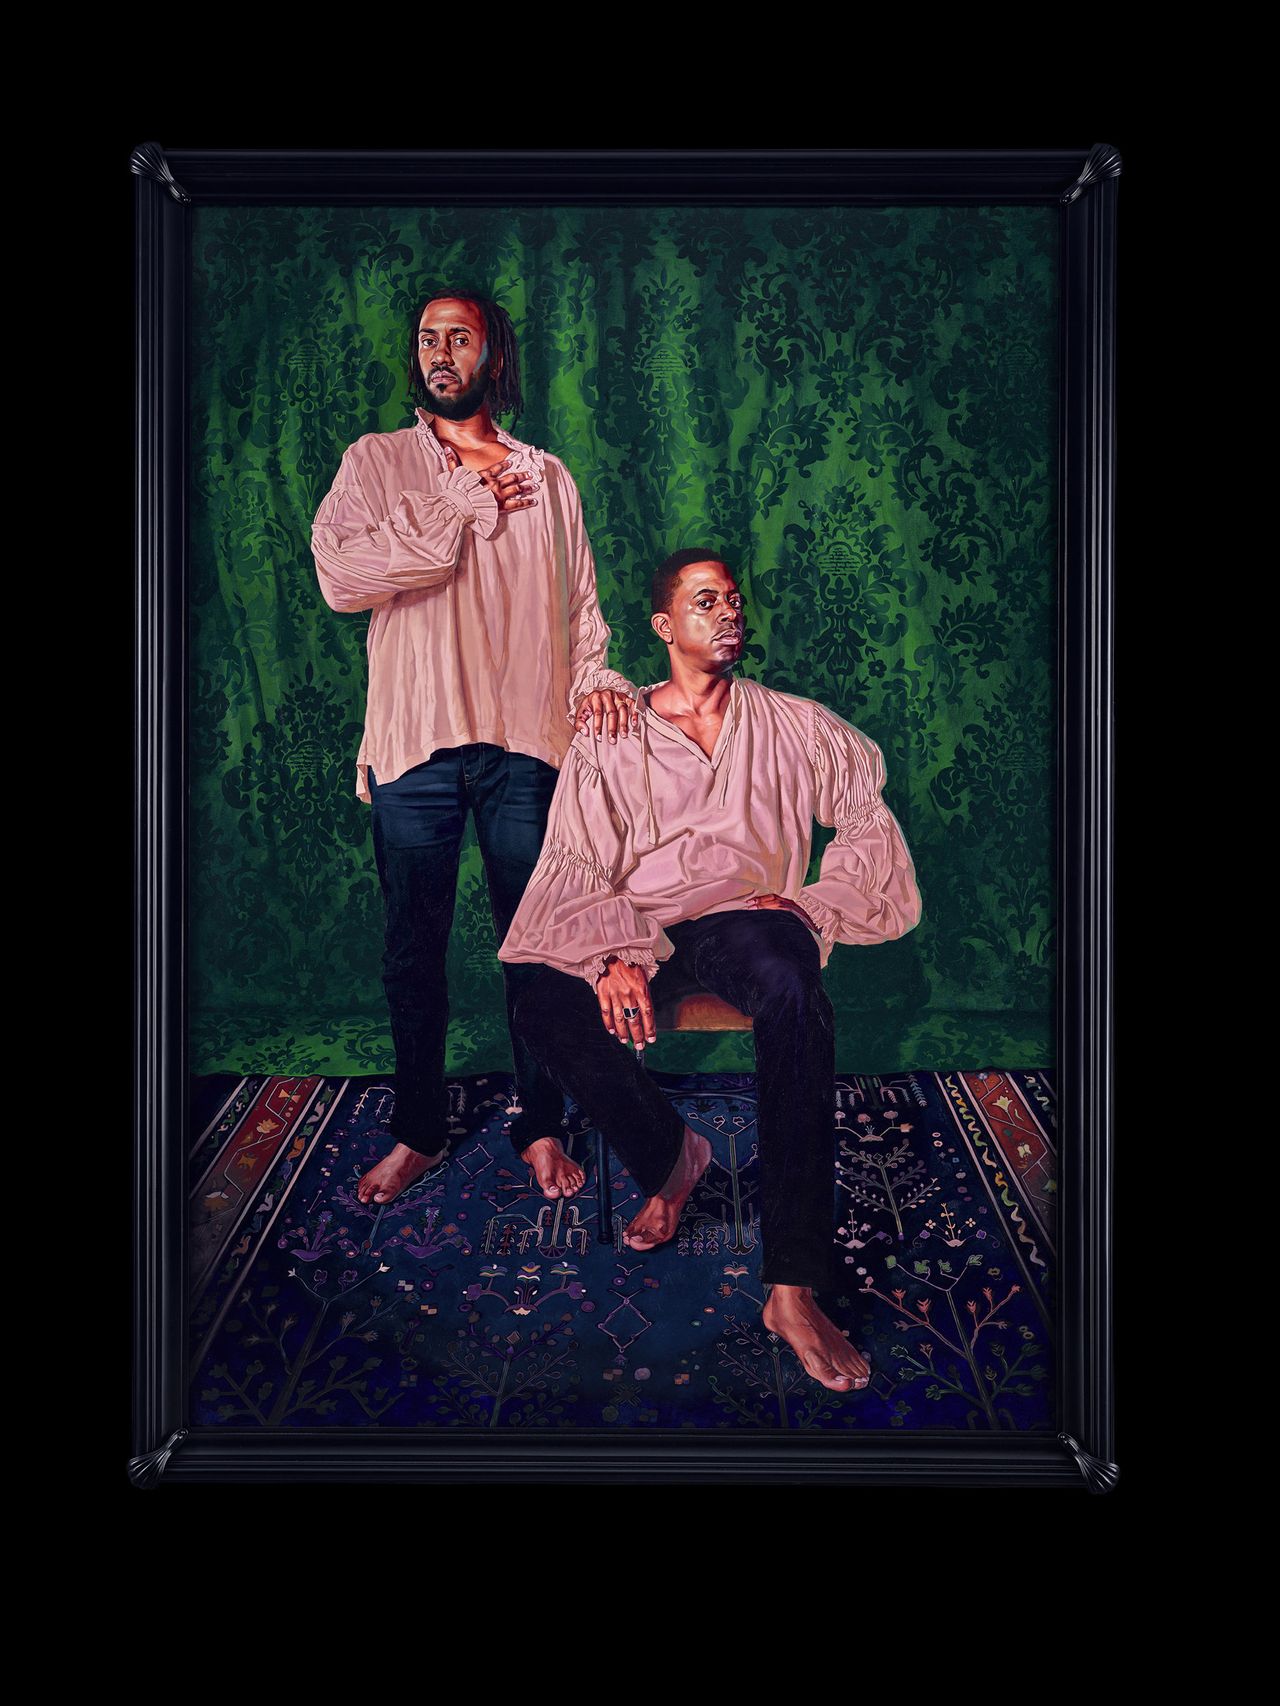 Kehinde Wiley, "Portrait of Rashid Johnson and Sanford Biggers, The Ambassadors," 2017, oil on canvas